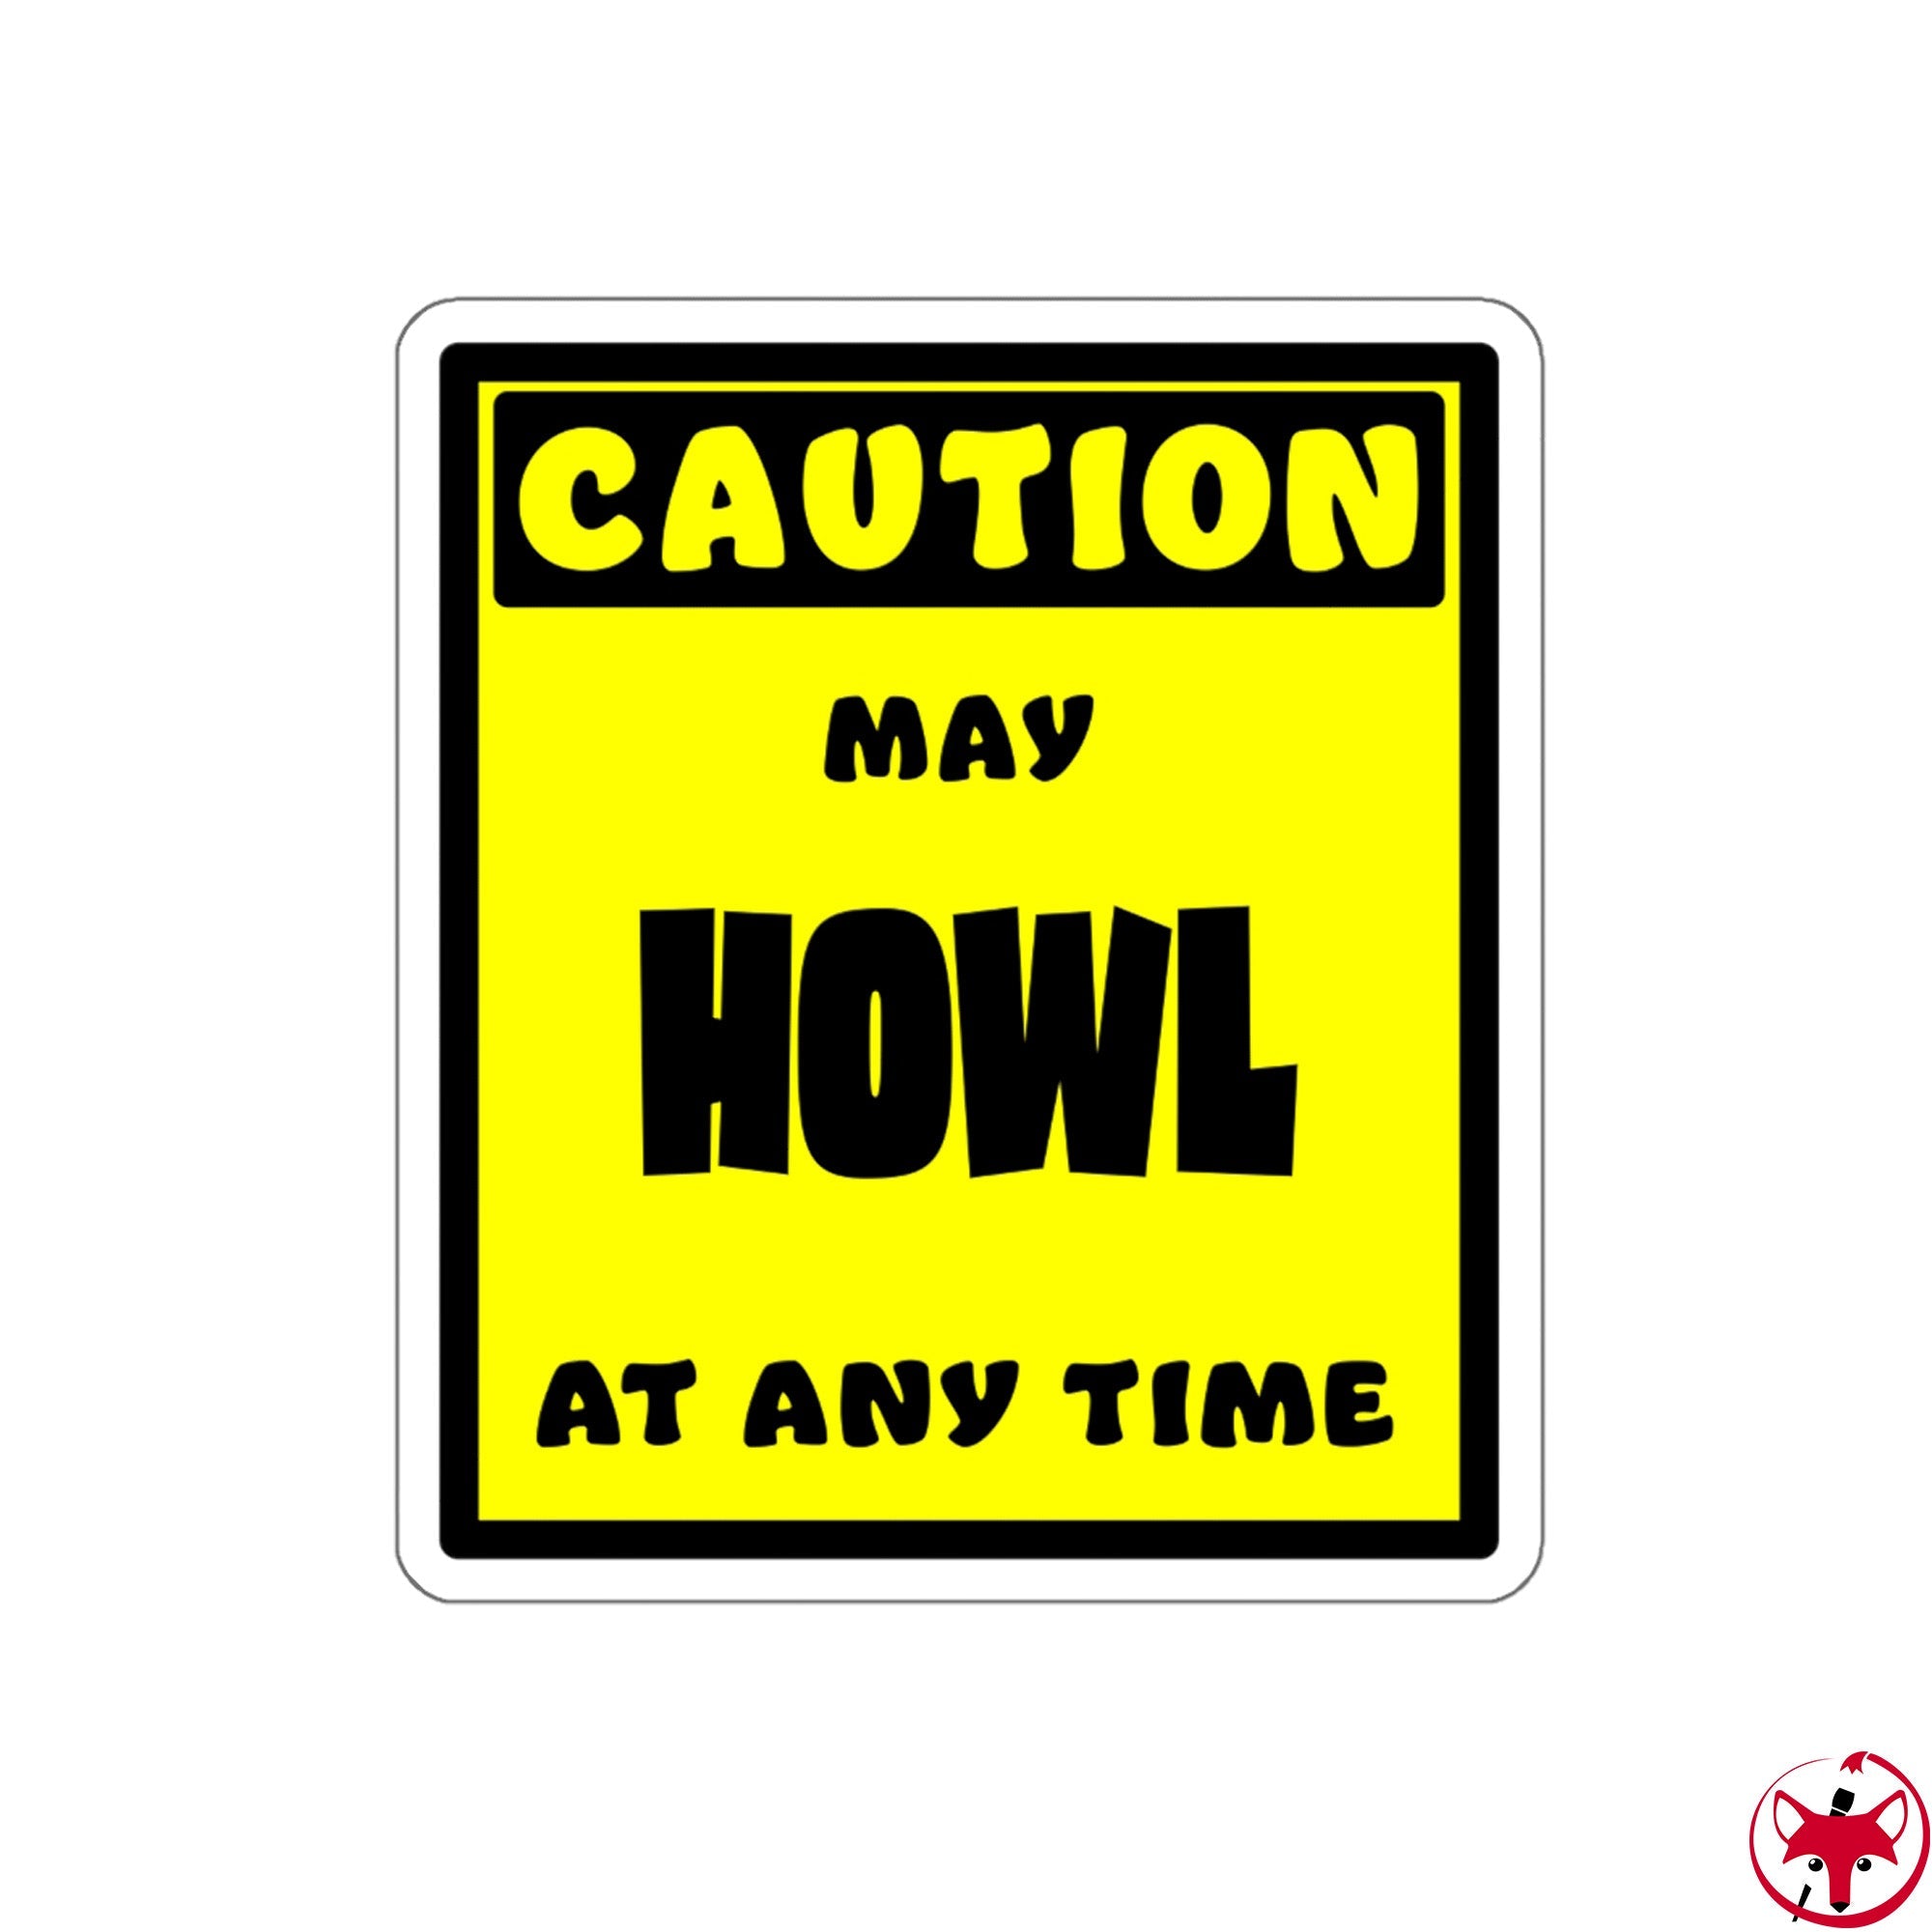 CAUTION! May HOWL at any time! - Sticker Sticker AFLT-Whootorca 